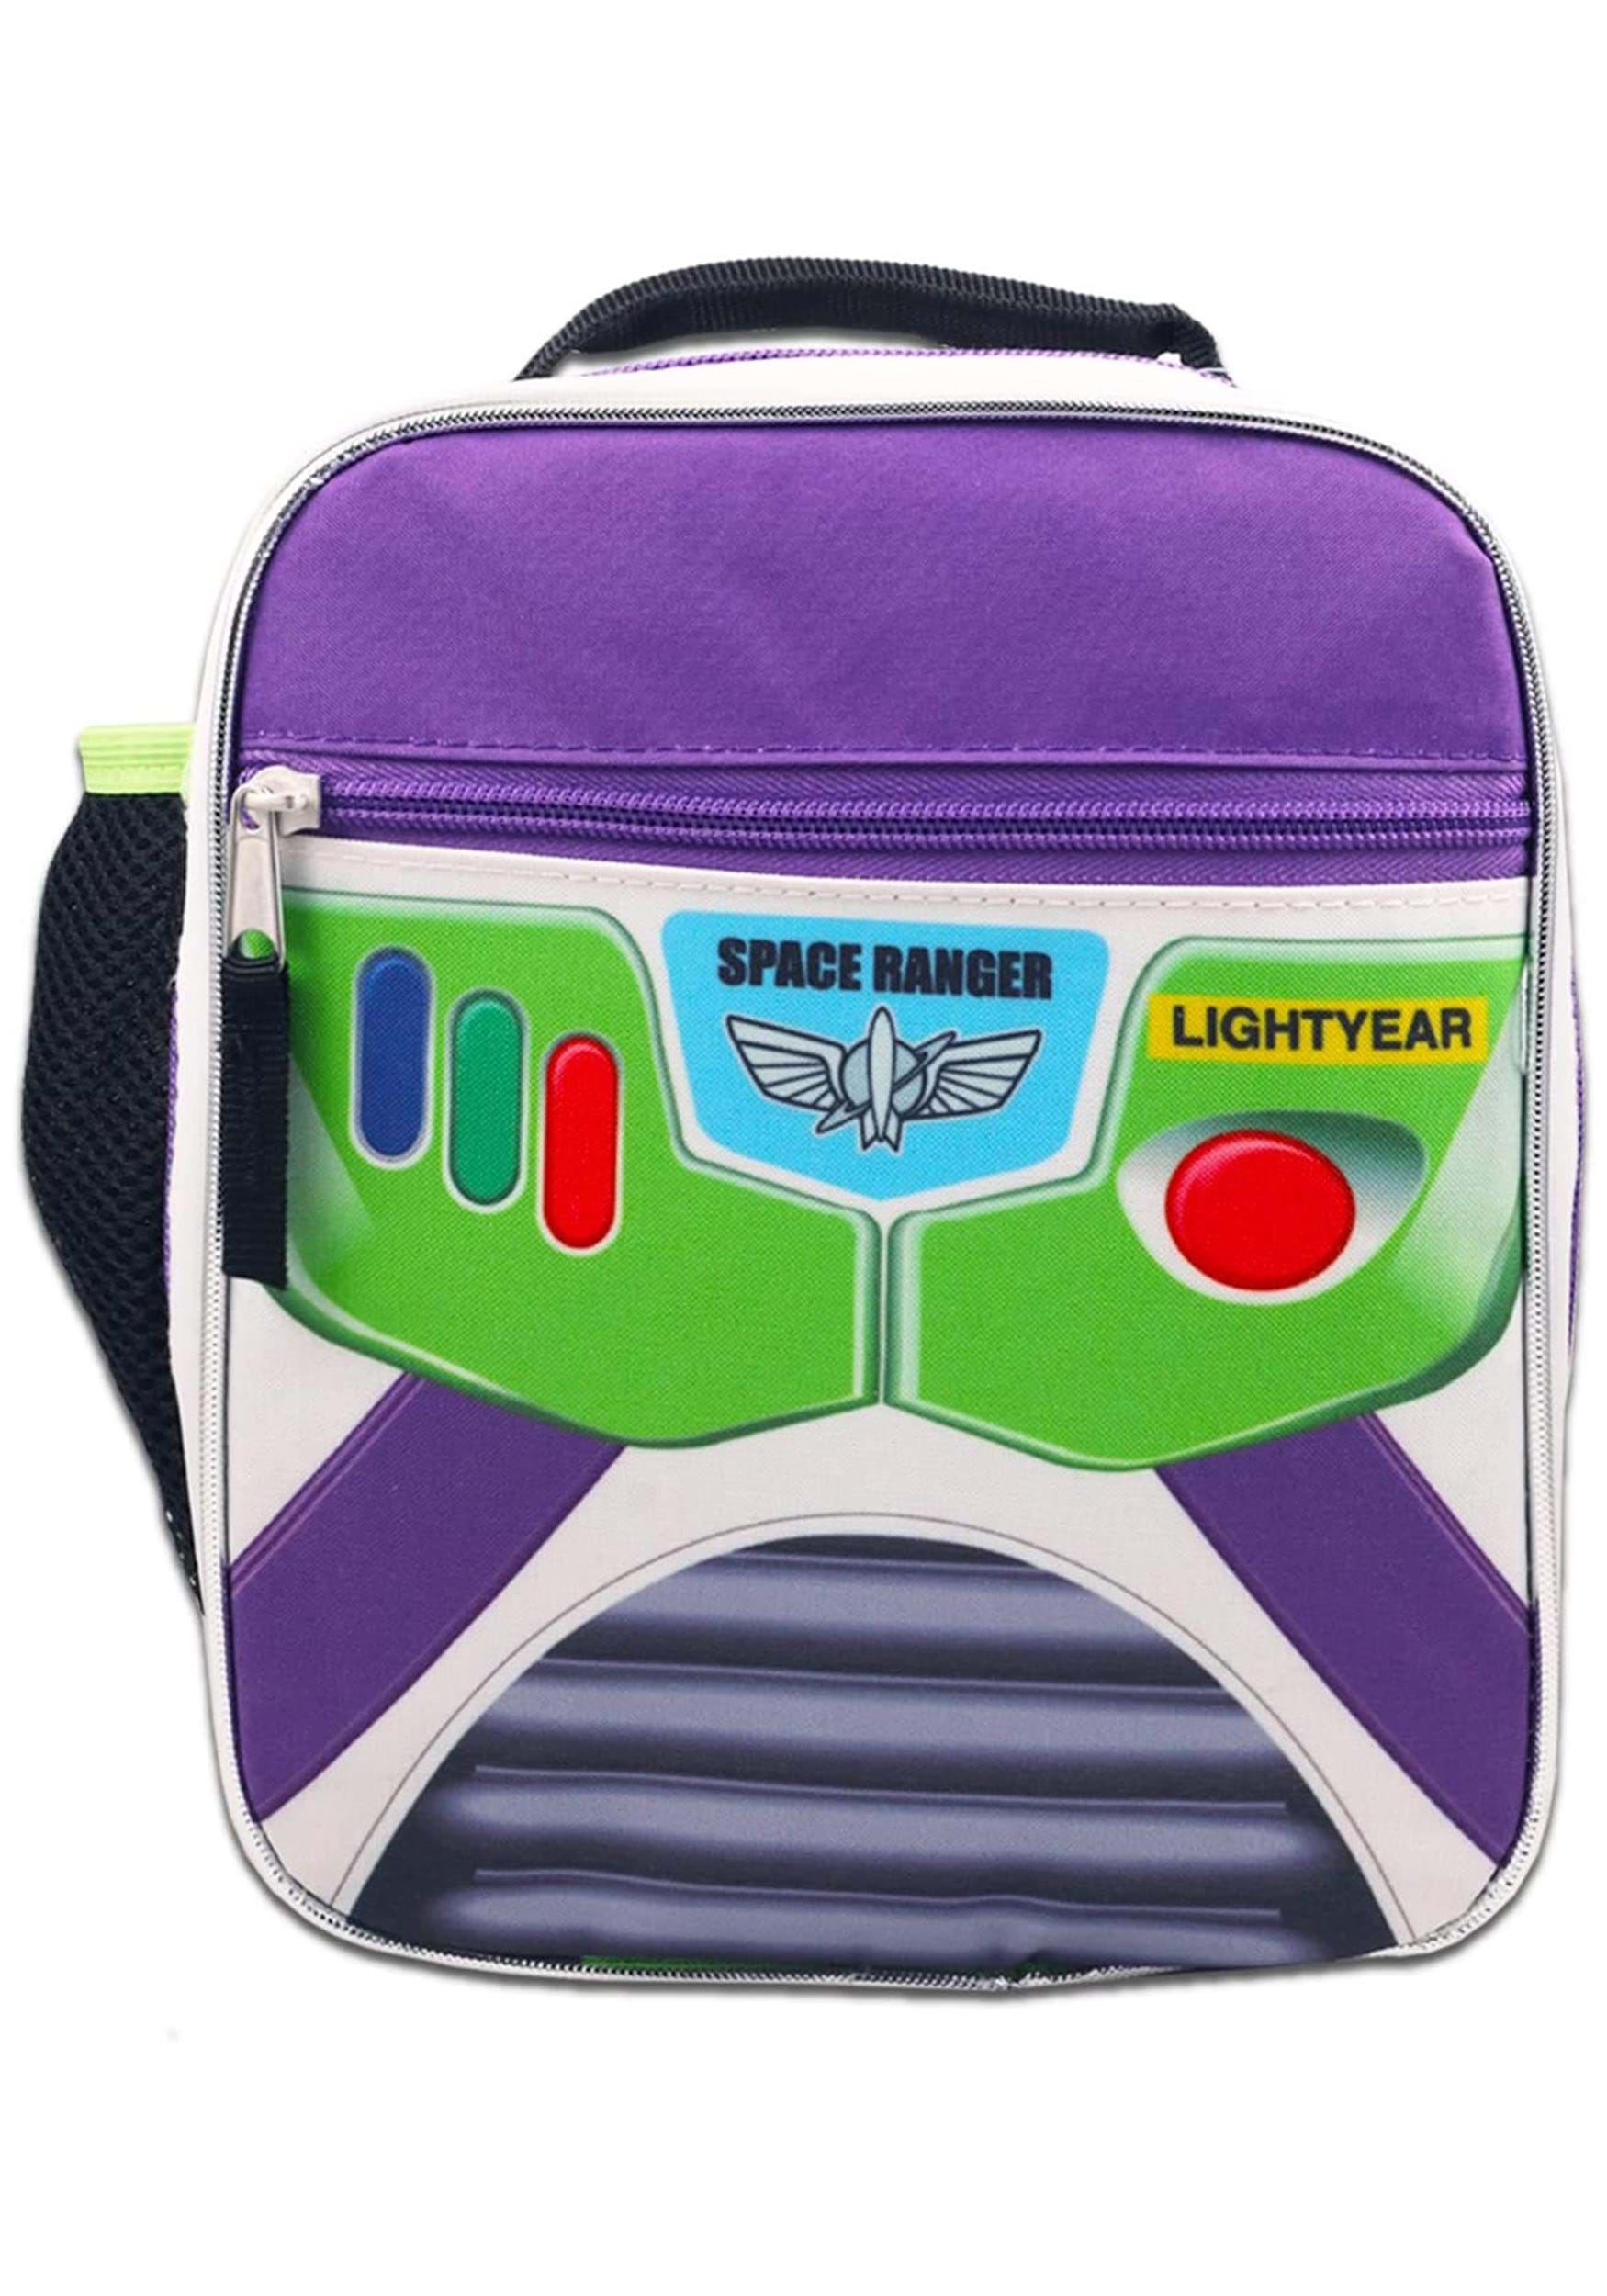 https://images.fun.com/products/90733/1-1/buzz-lightyear-lunch-box.jpg